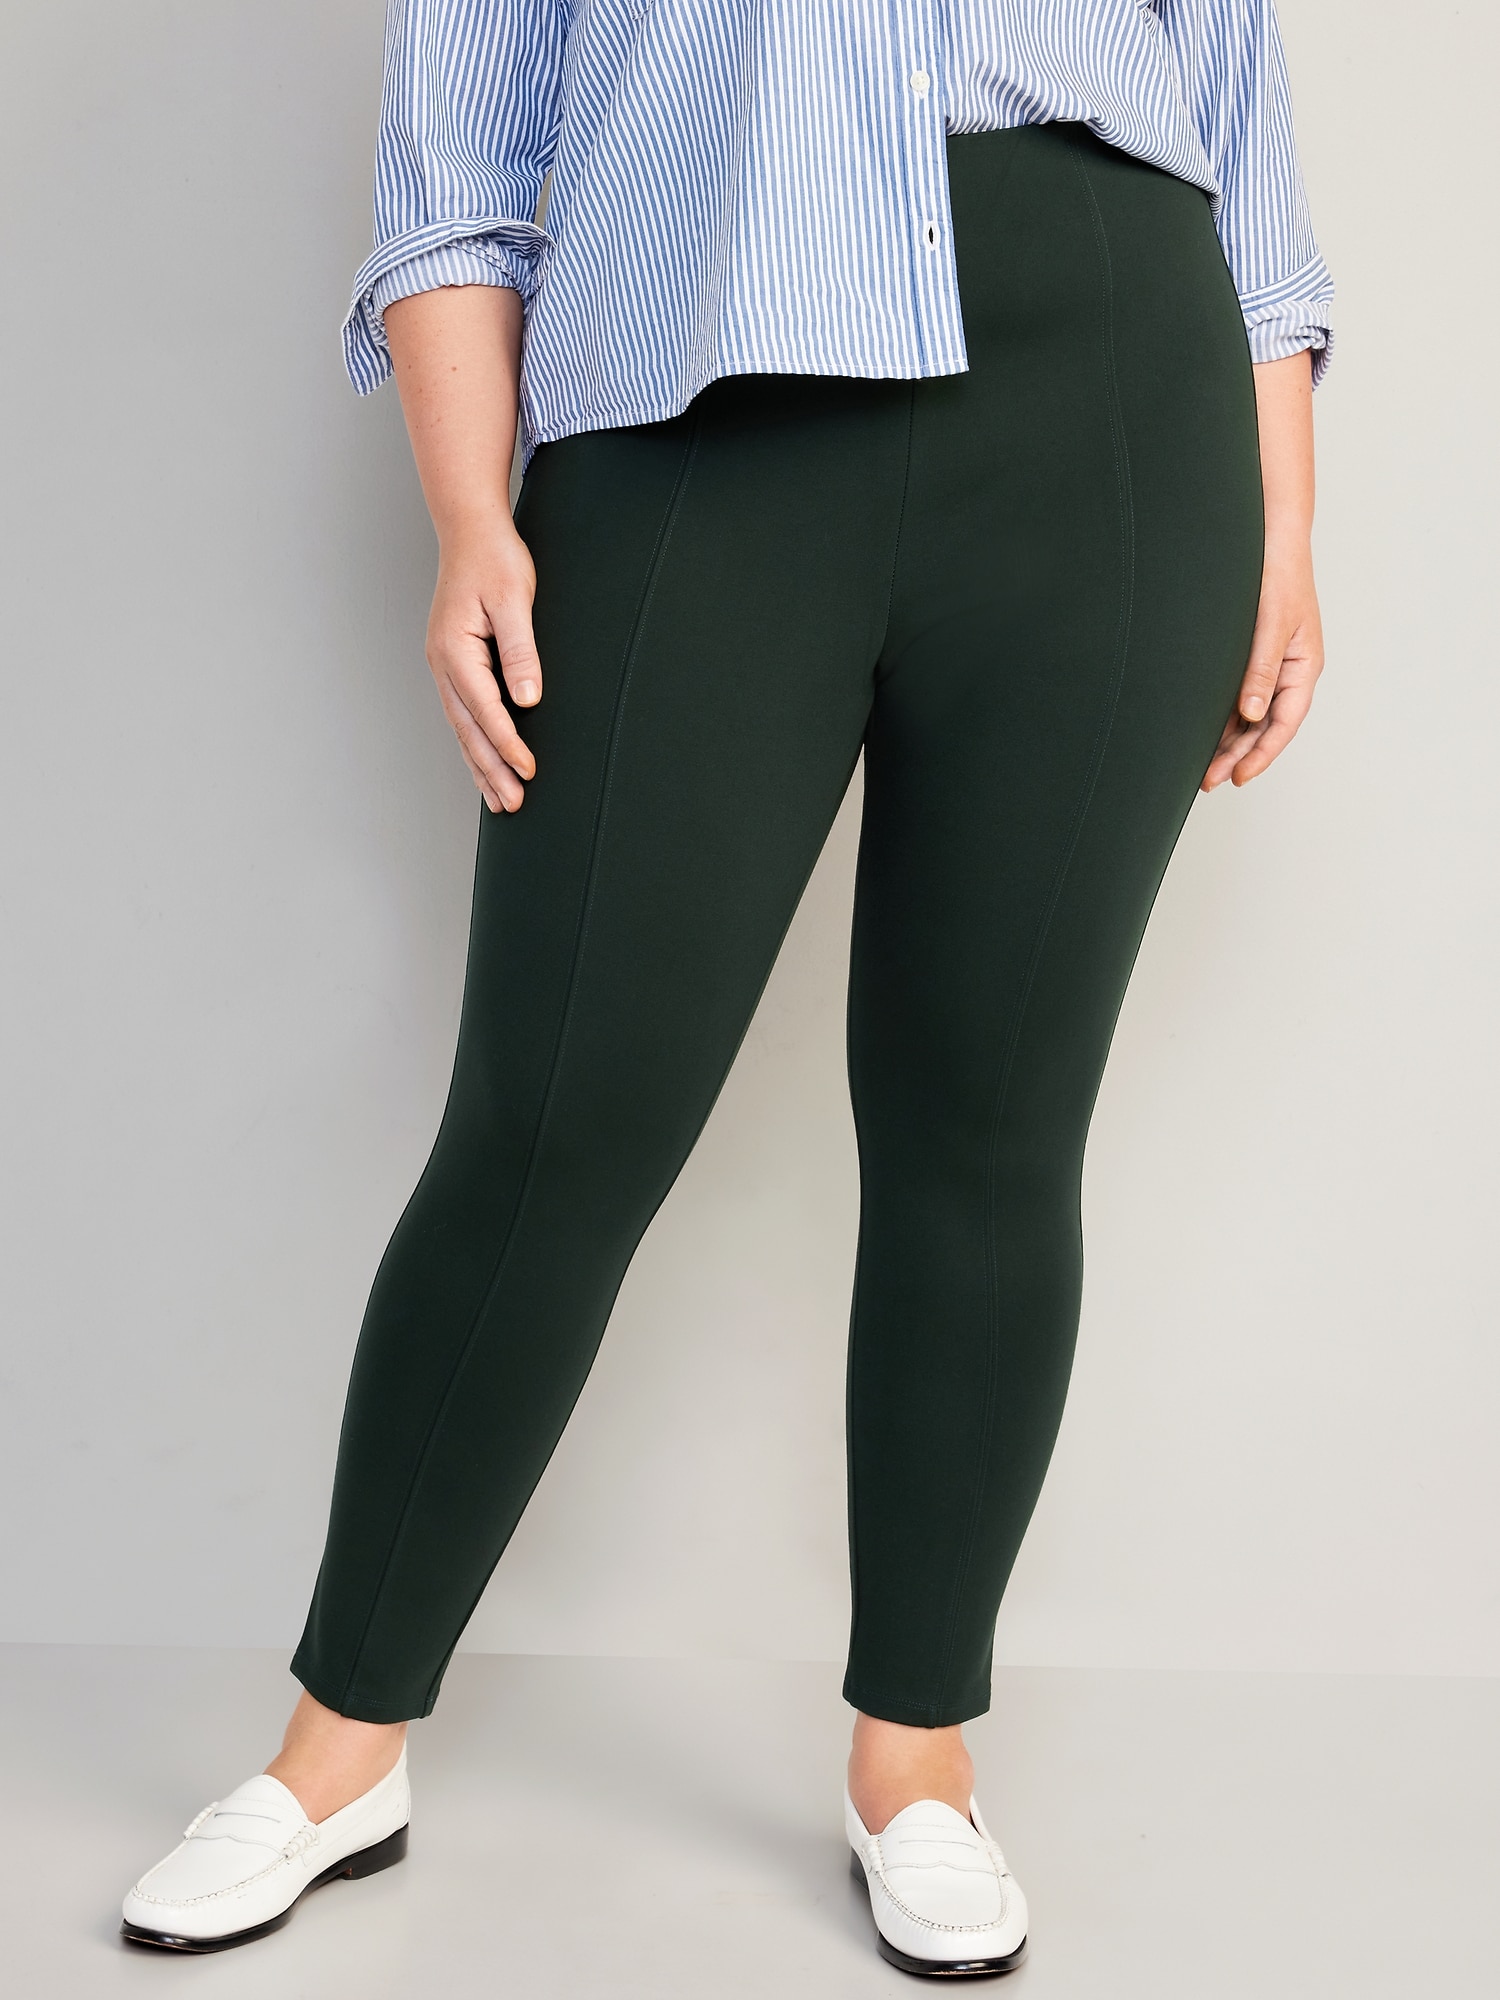 Extra High-Waisted Stevie Skinny Ankle Pants for Women